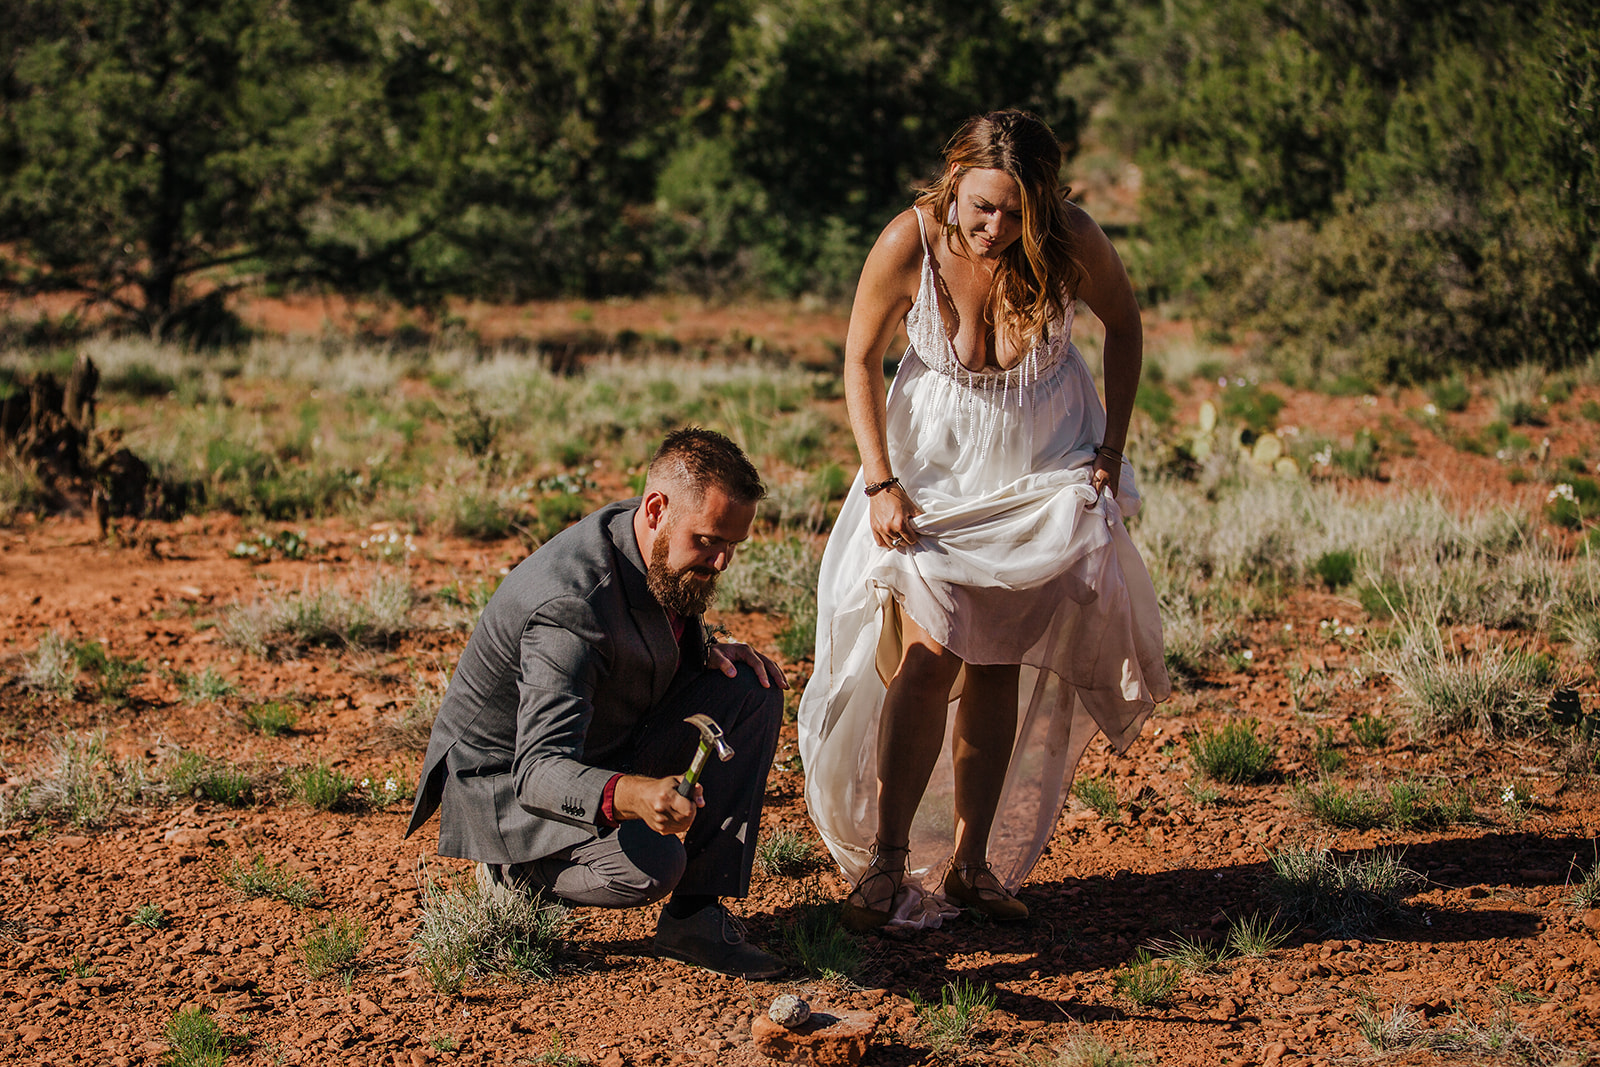 bride and groom perform ceremony to celebrate being married in desert elopement